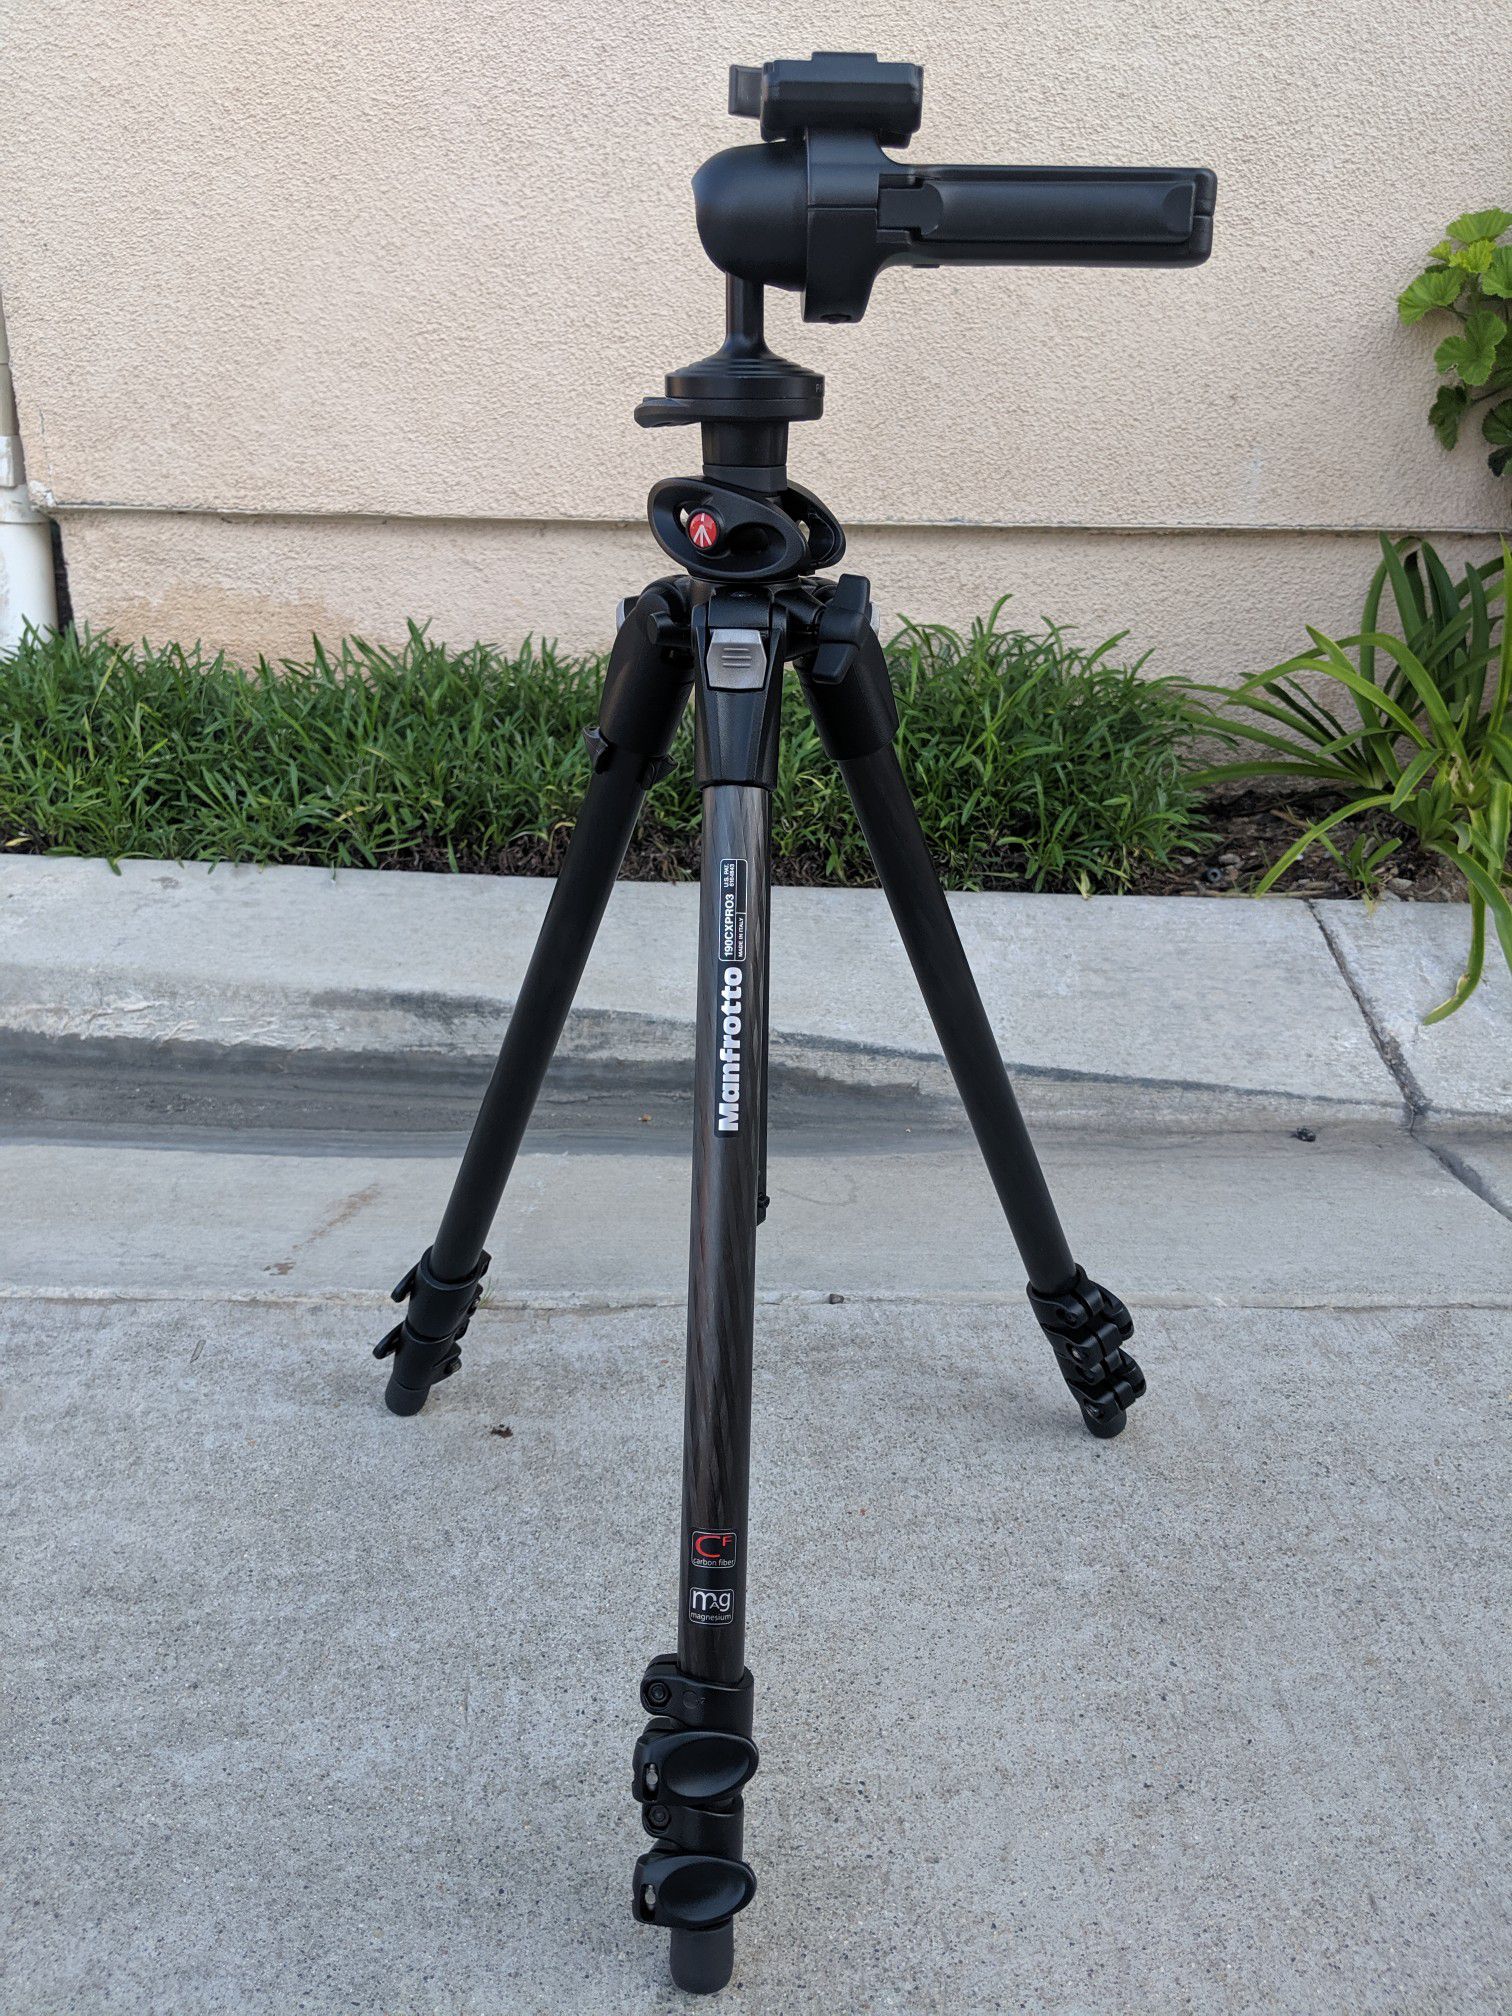 Manfrotto 190CXPRO3 Carbon Fiber Tripod with Manfrotto 322RC2 Improved Grip Action Ball Head